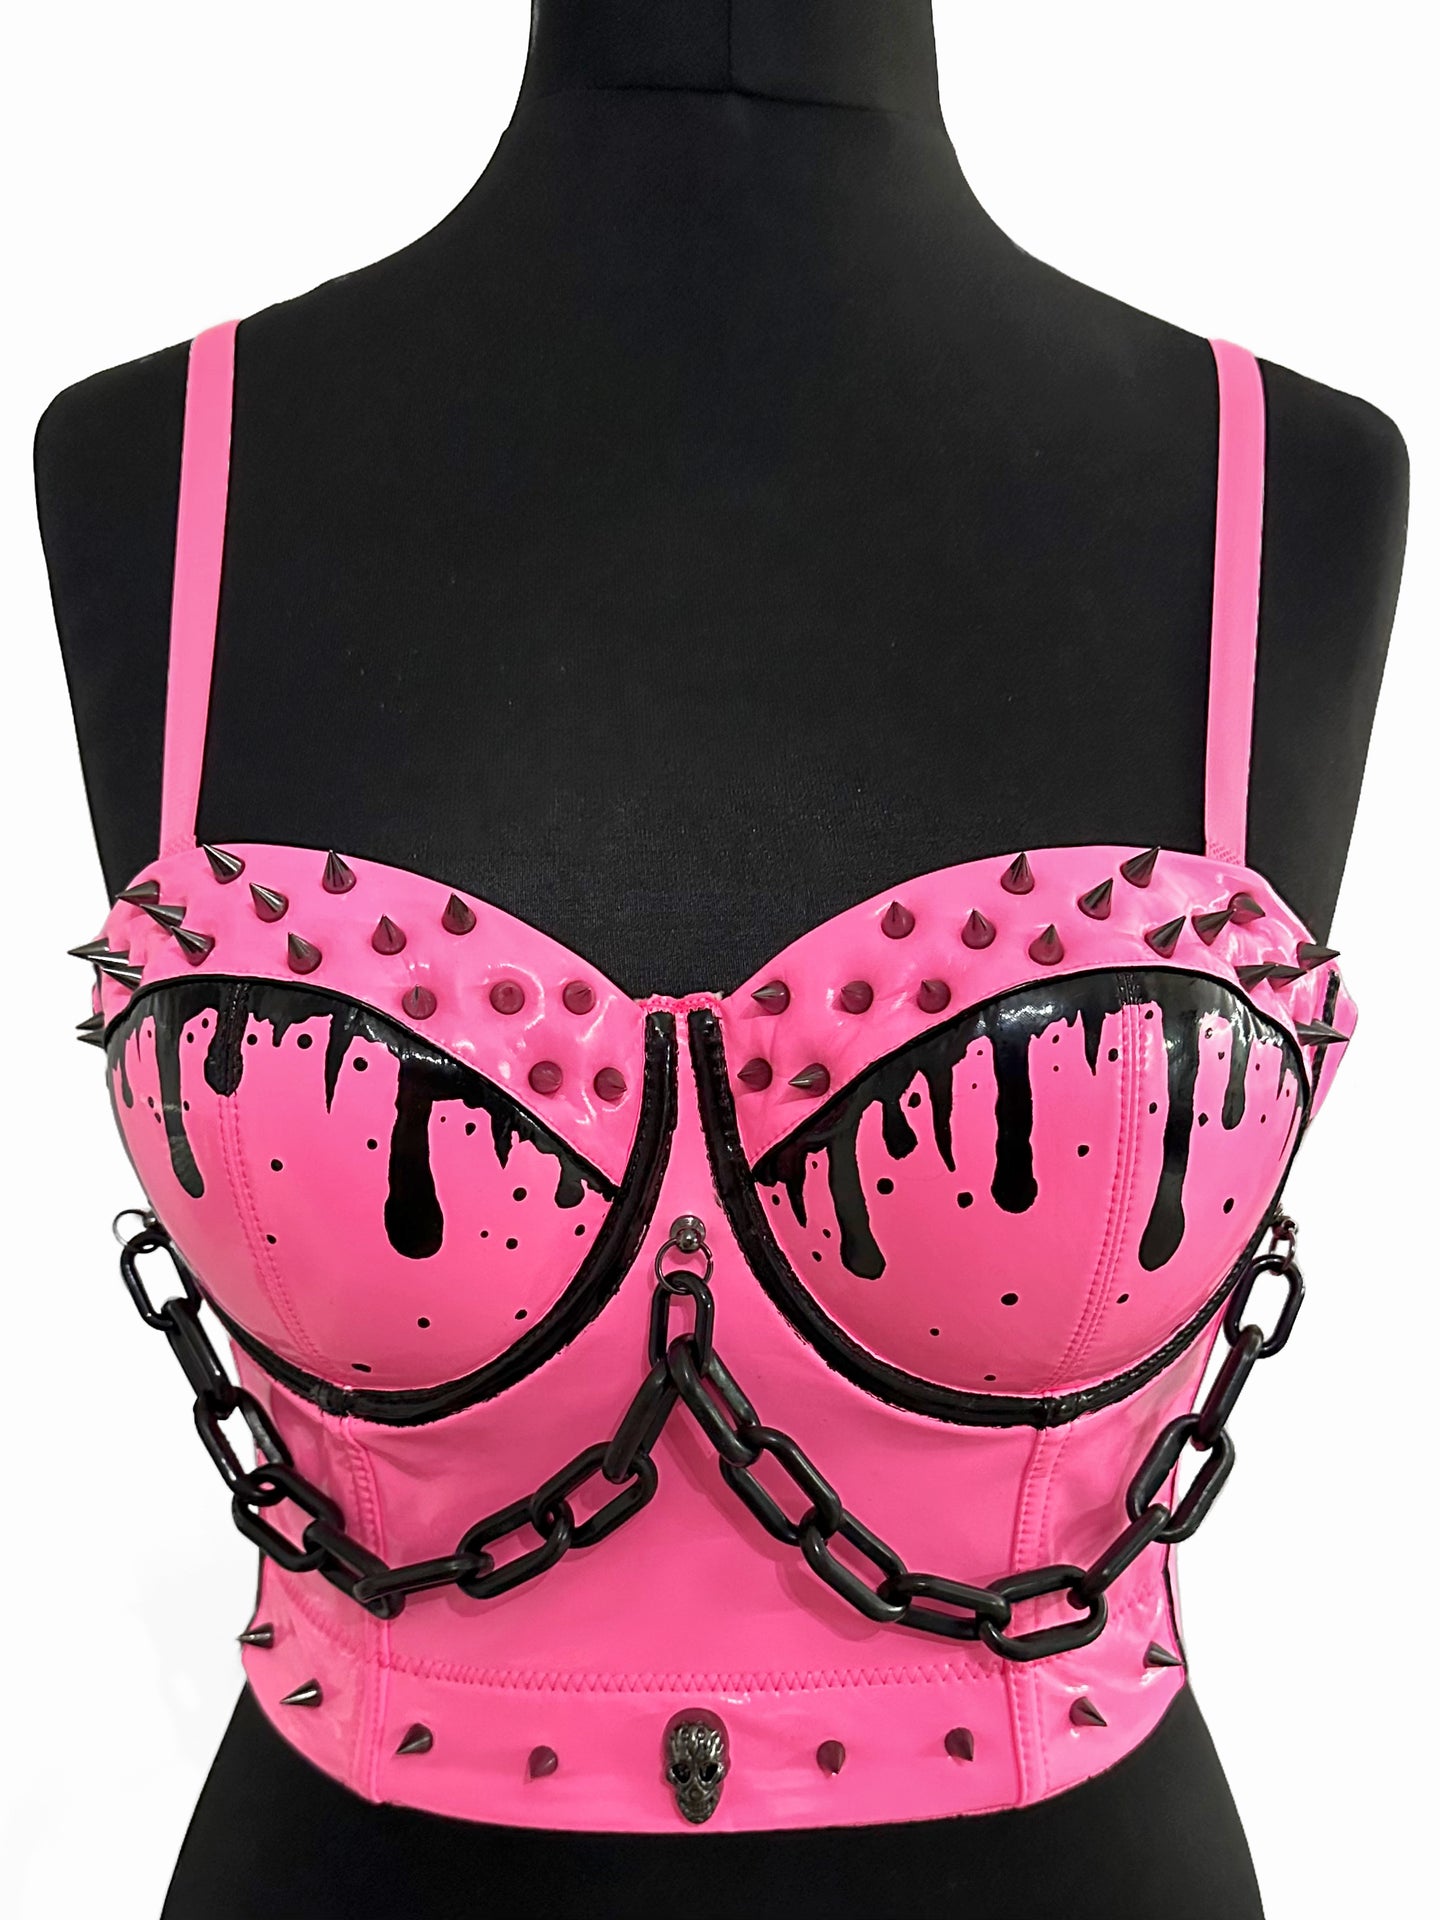 DRIPPING BLOOD PINK LEATHER BUSTIER